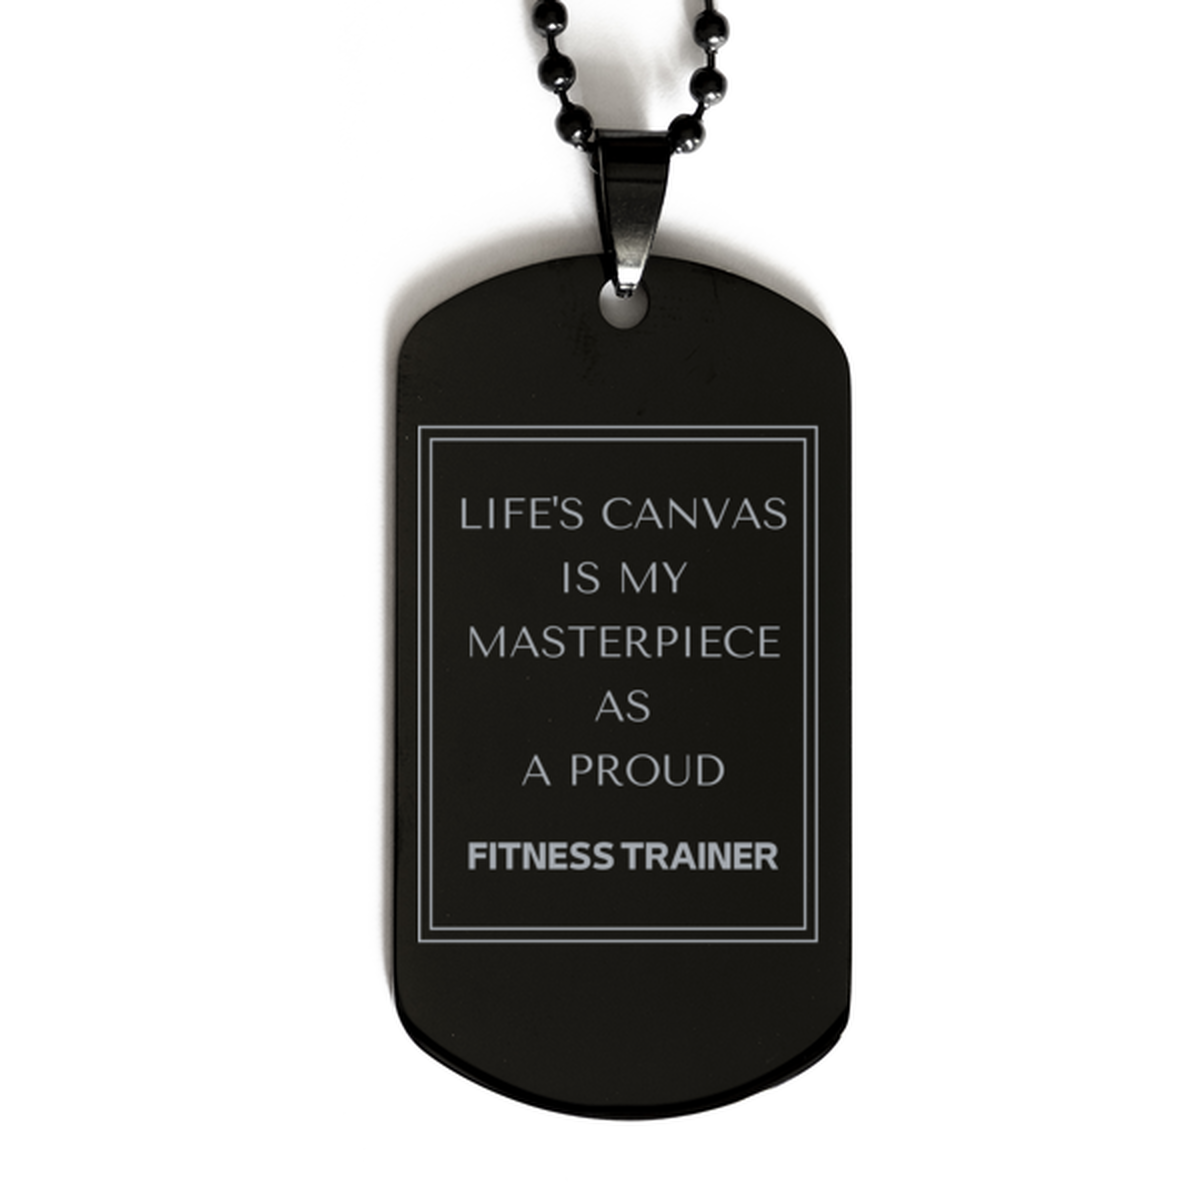 Proud Fitness Trainer Gifts, Life's canvas is my masterpiece, Epic Birthday Christmas Unique Black Dog Tag For Fitness Trainer, Coworkers, Men, Women, Friends